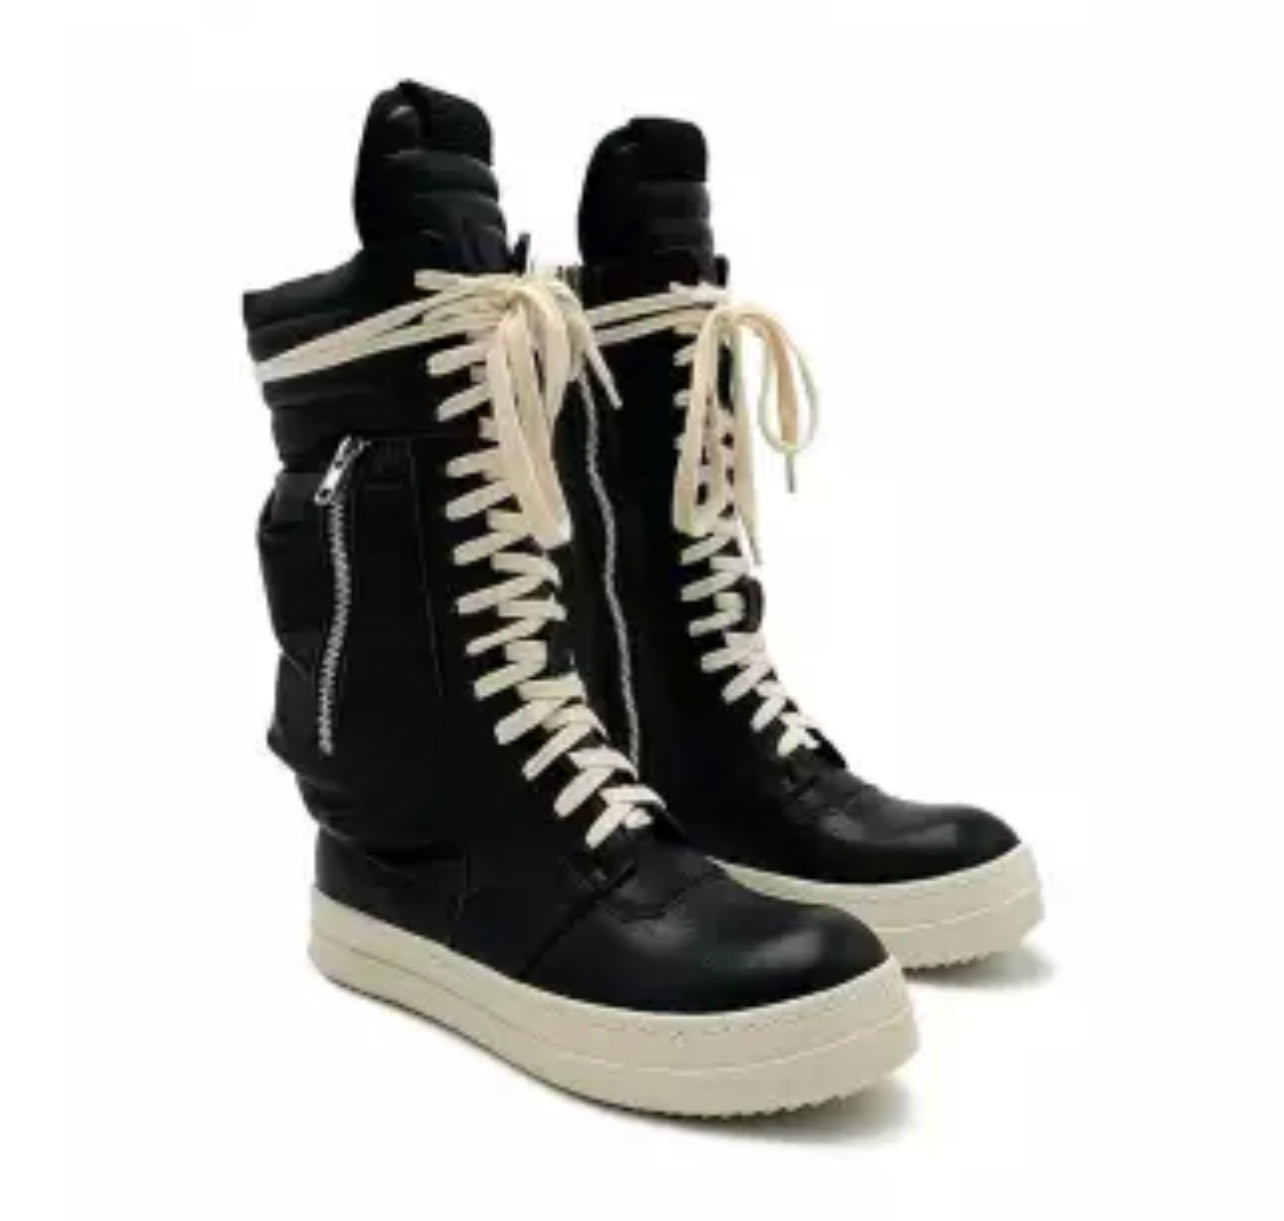 Lace Up Motorcycle Boots